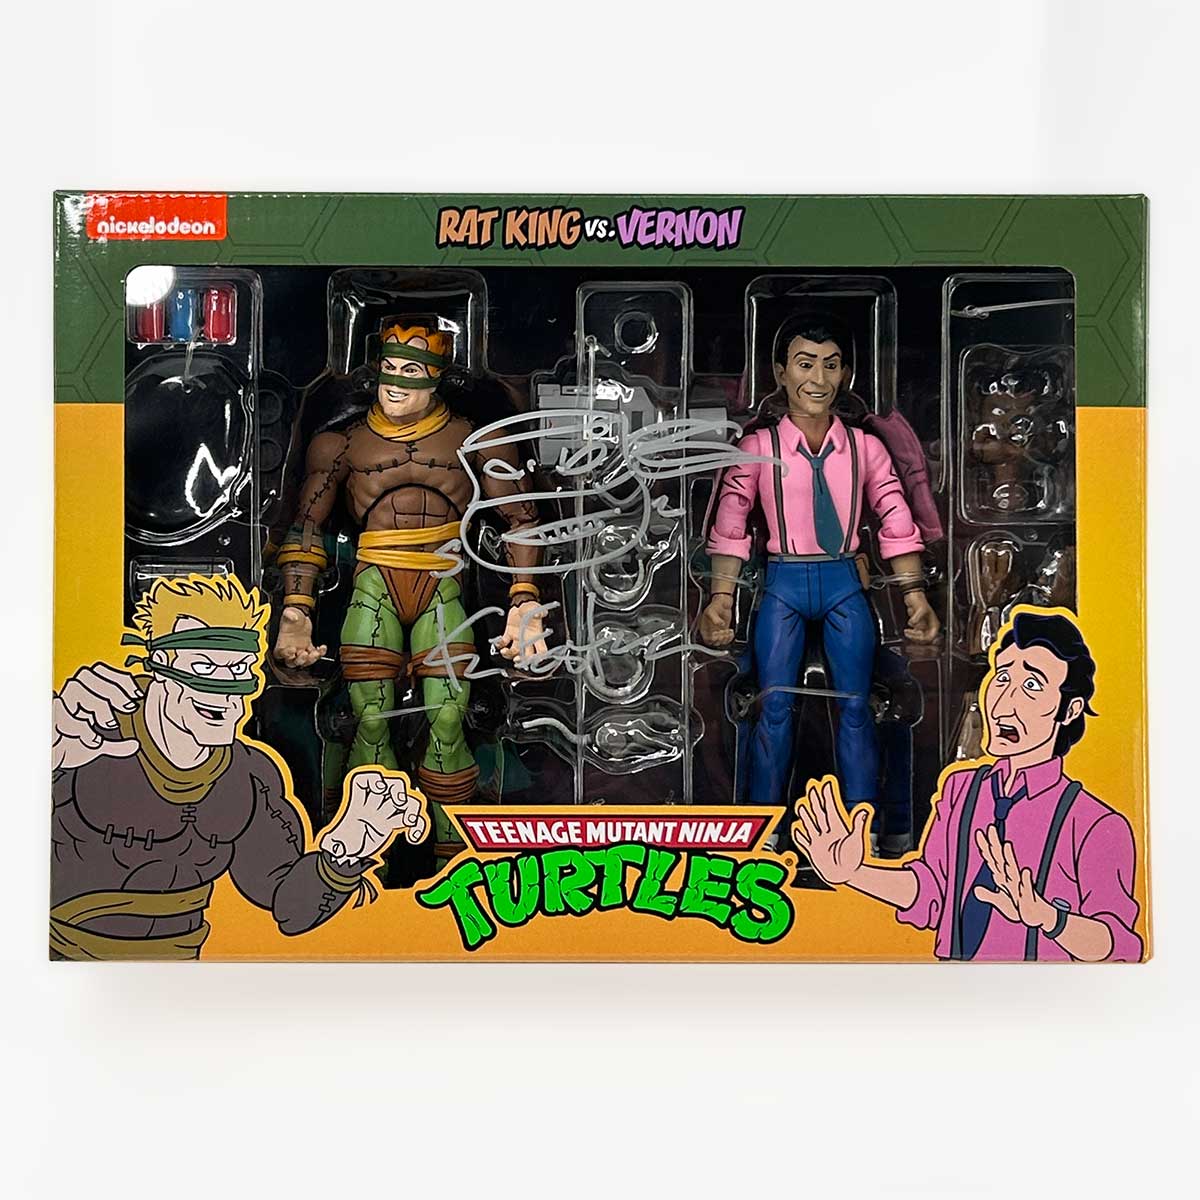 Read more about the article NECA/Team Eastman Exclusives Department is Fully Stocked